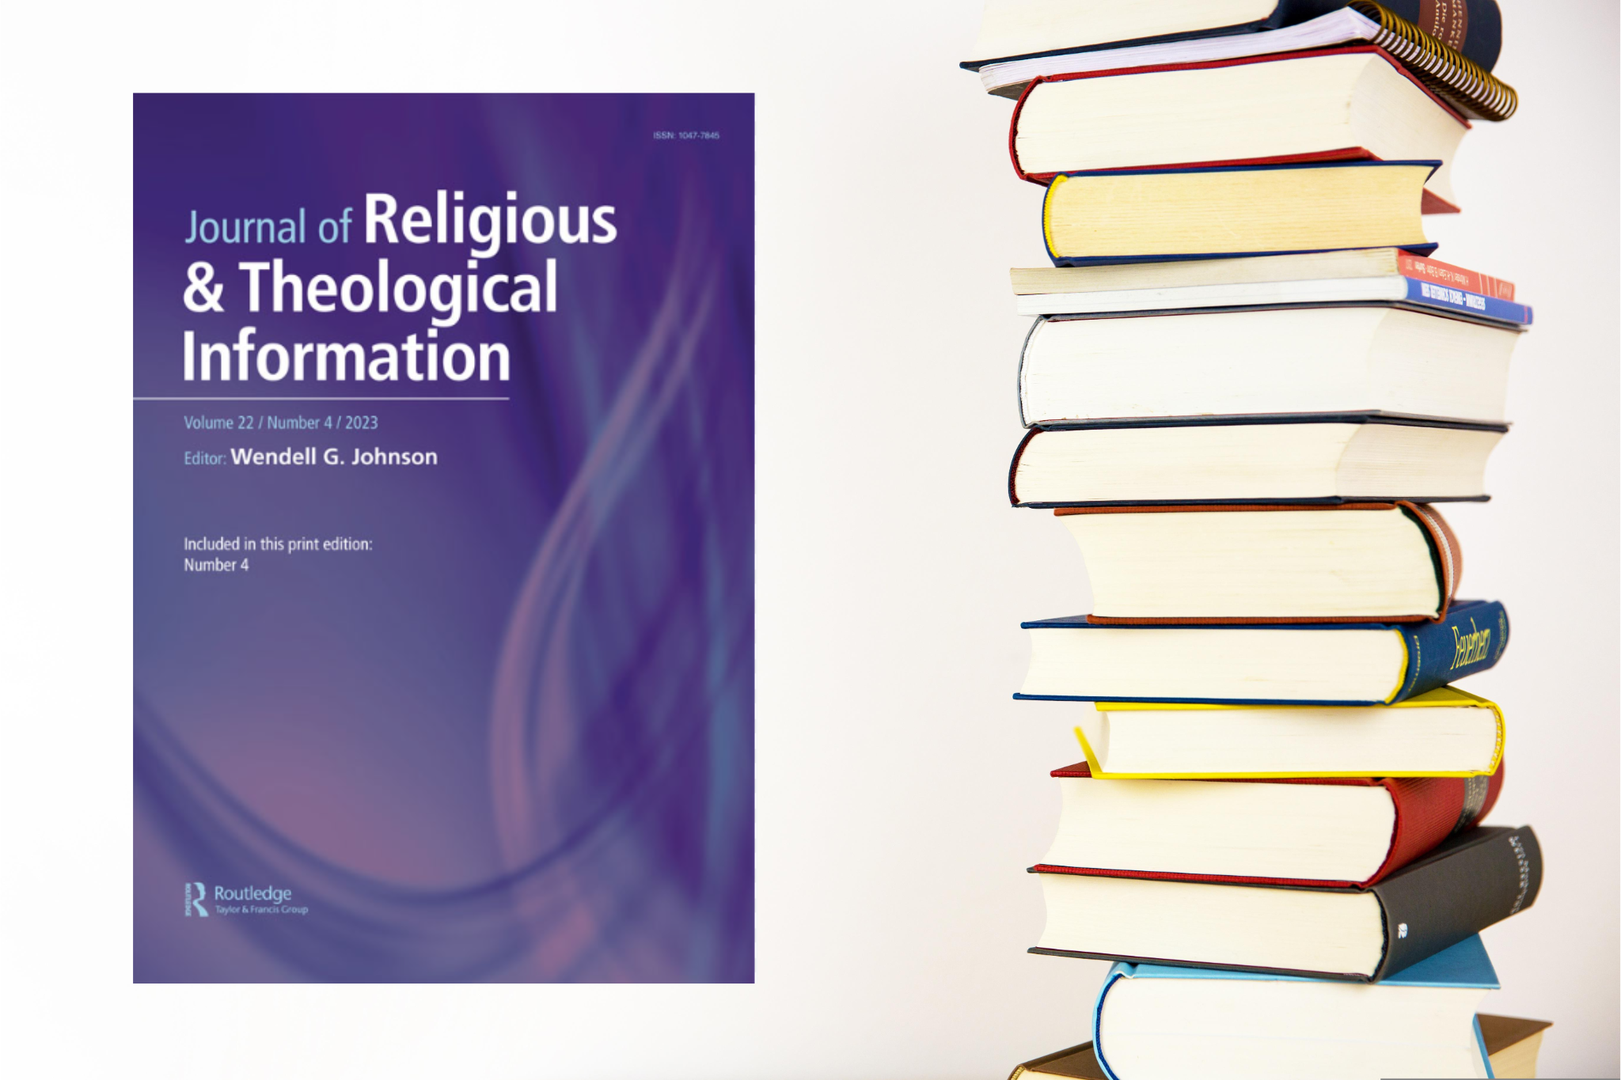 Johannes Fröh & Matthew Ryan Robinson (2023) Digital Religious Communication and the Facilitation of Social Resilience, Part 1: Theoretical Model and Proposal, Journal of Religious & Theological Information.